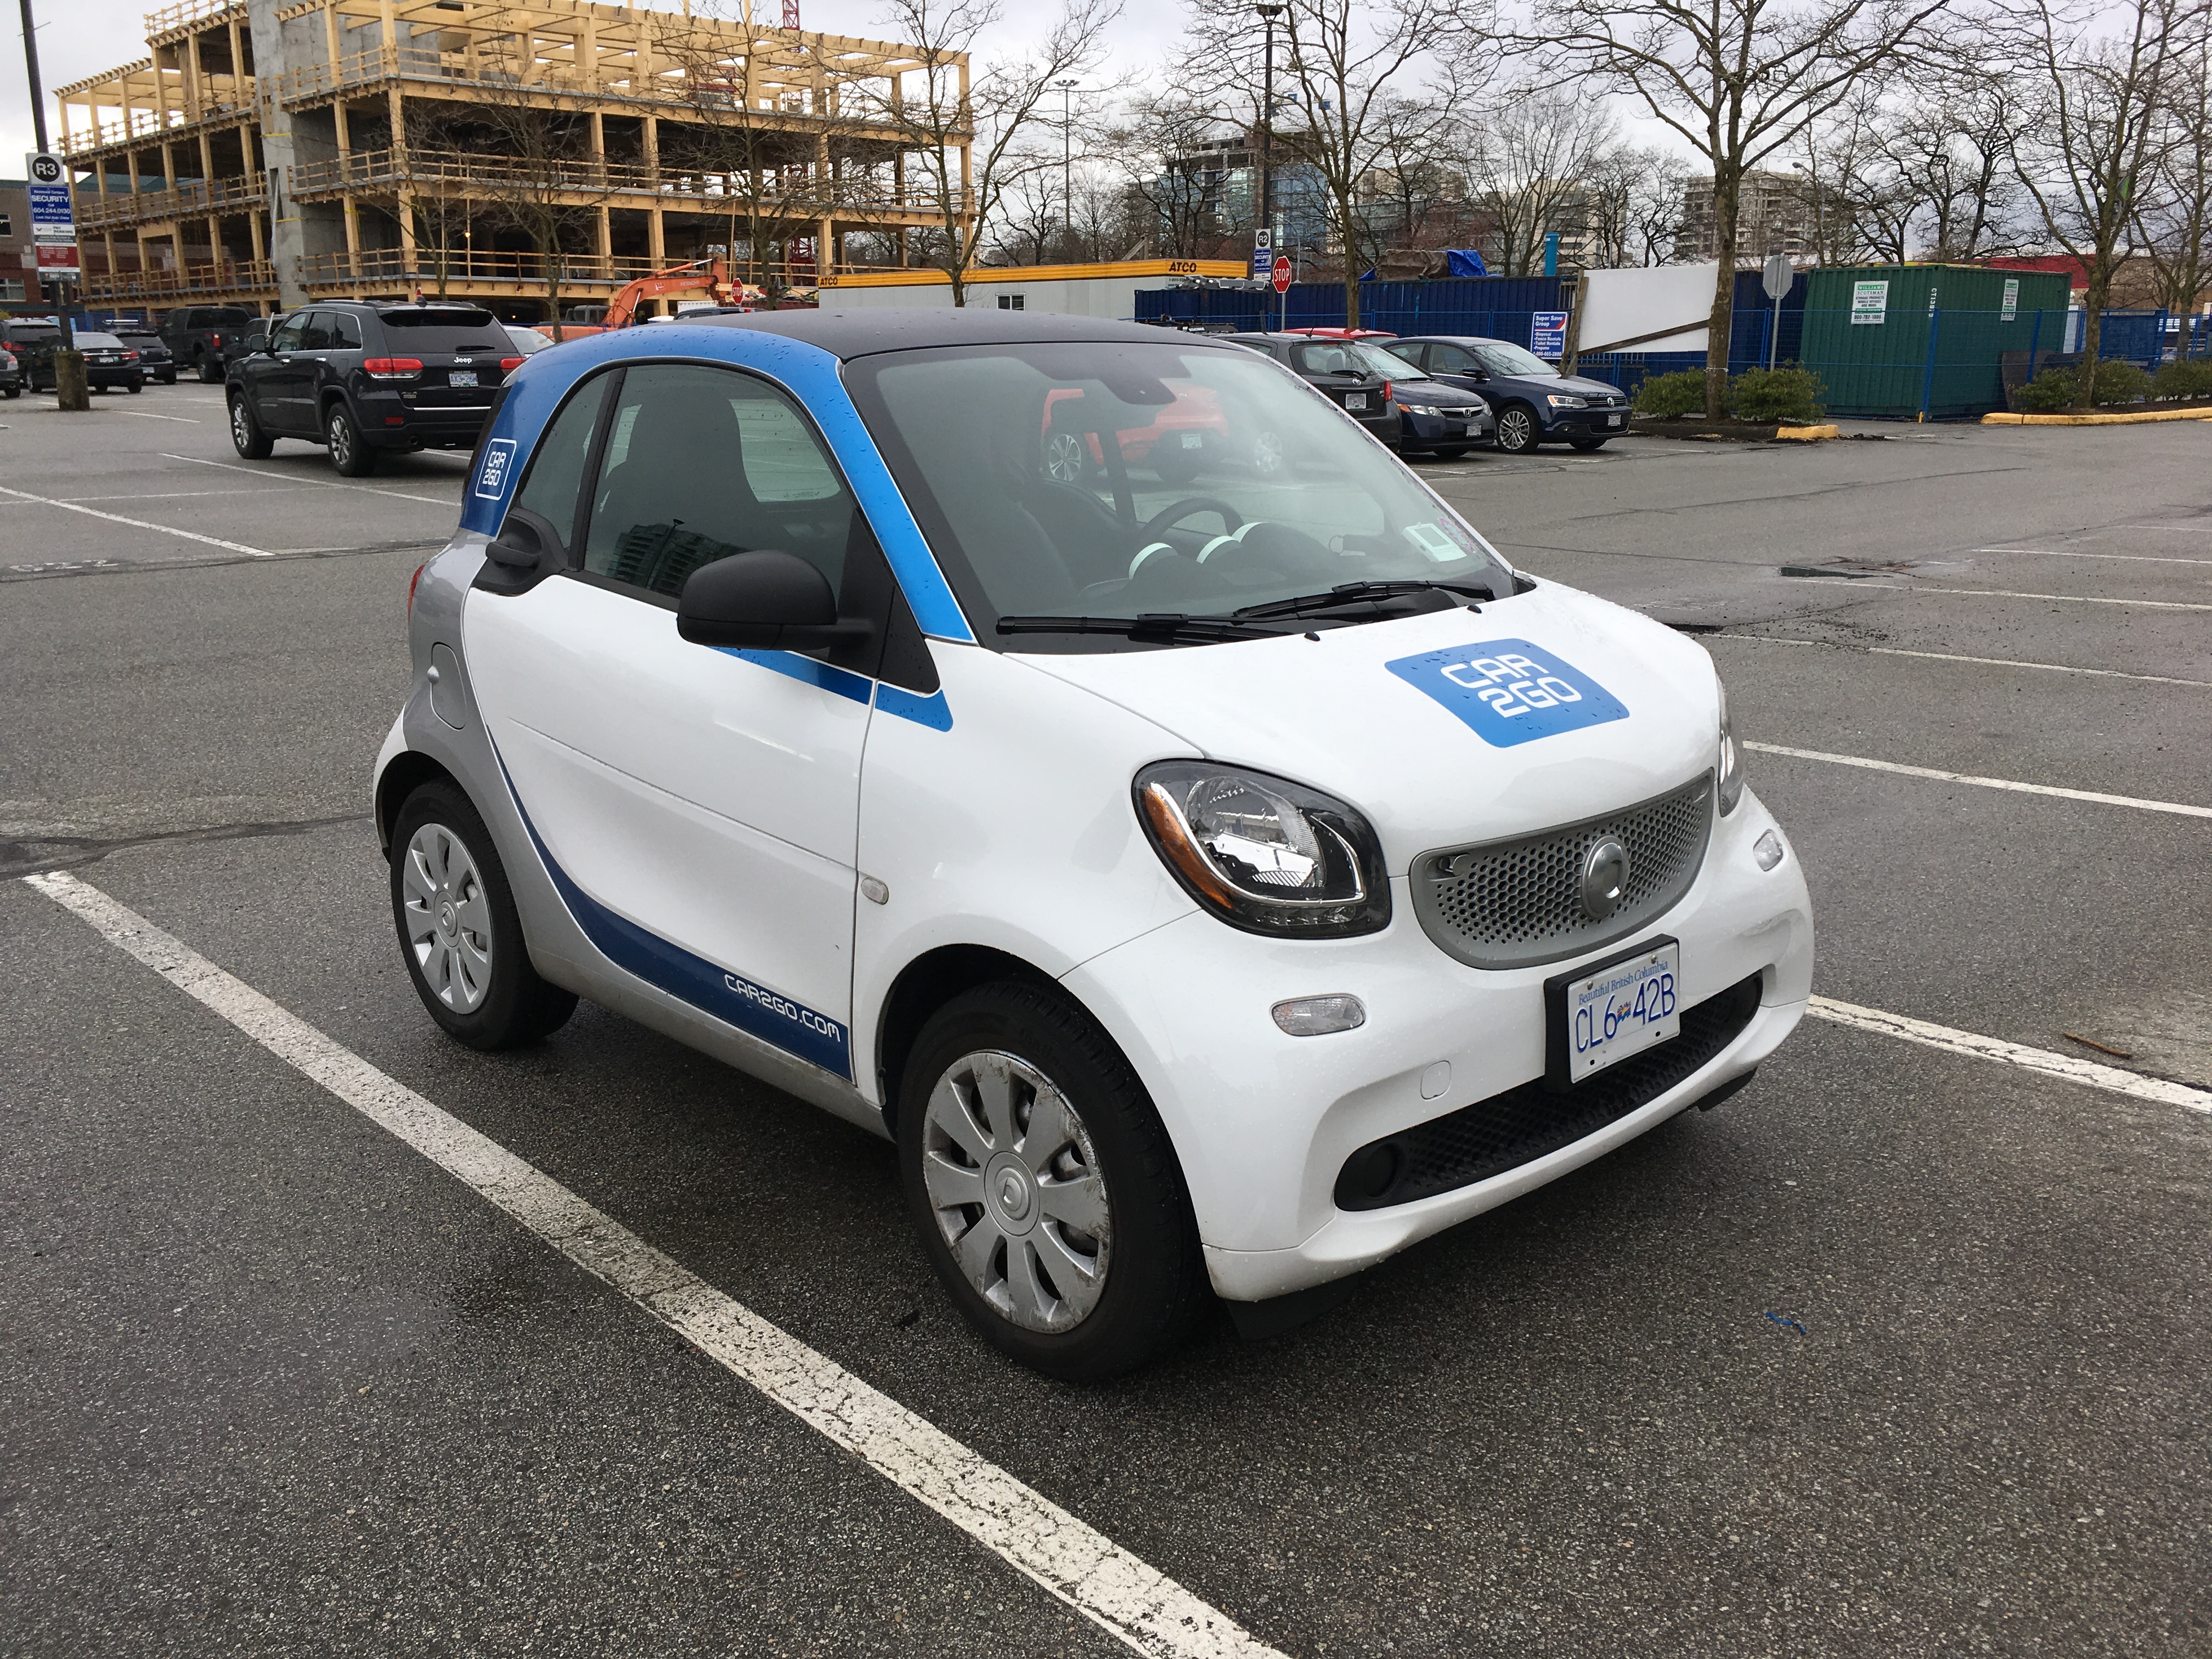 Driving around with car2go